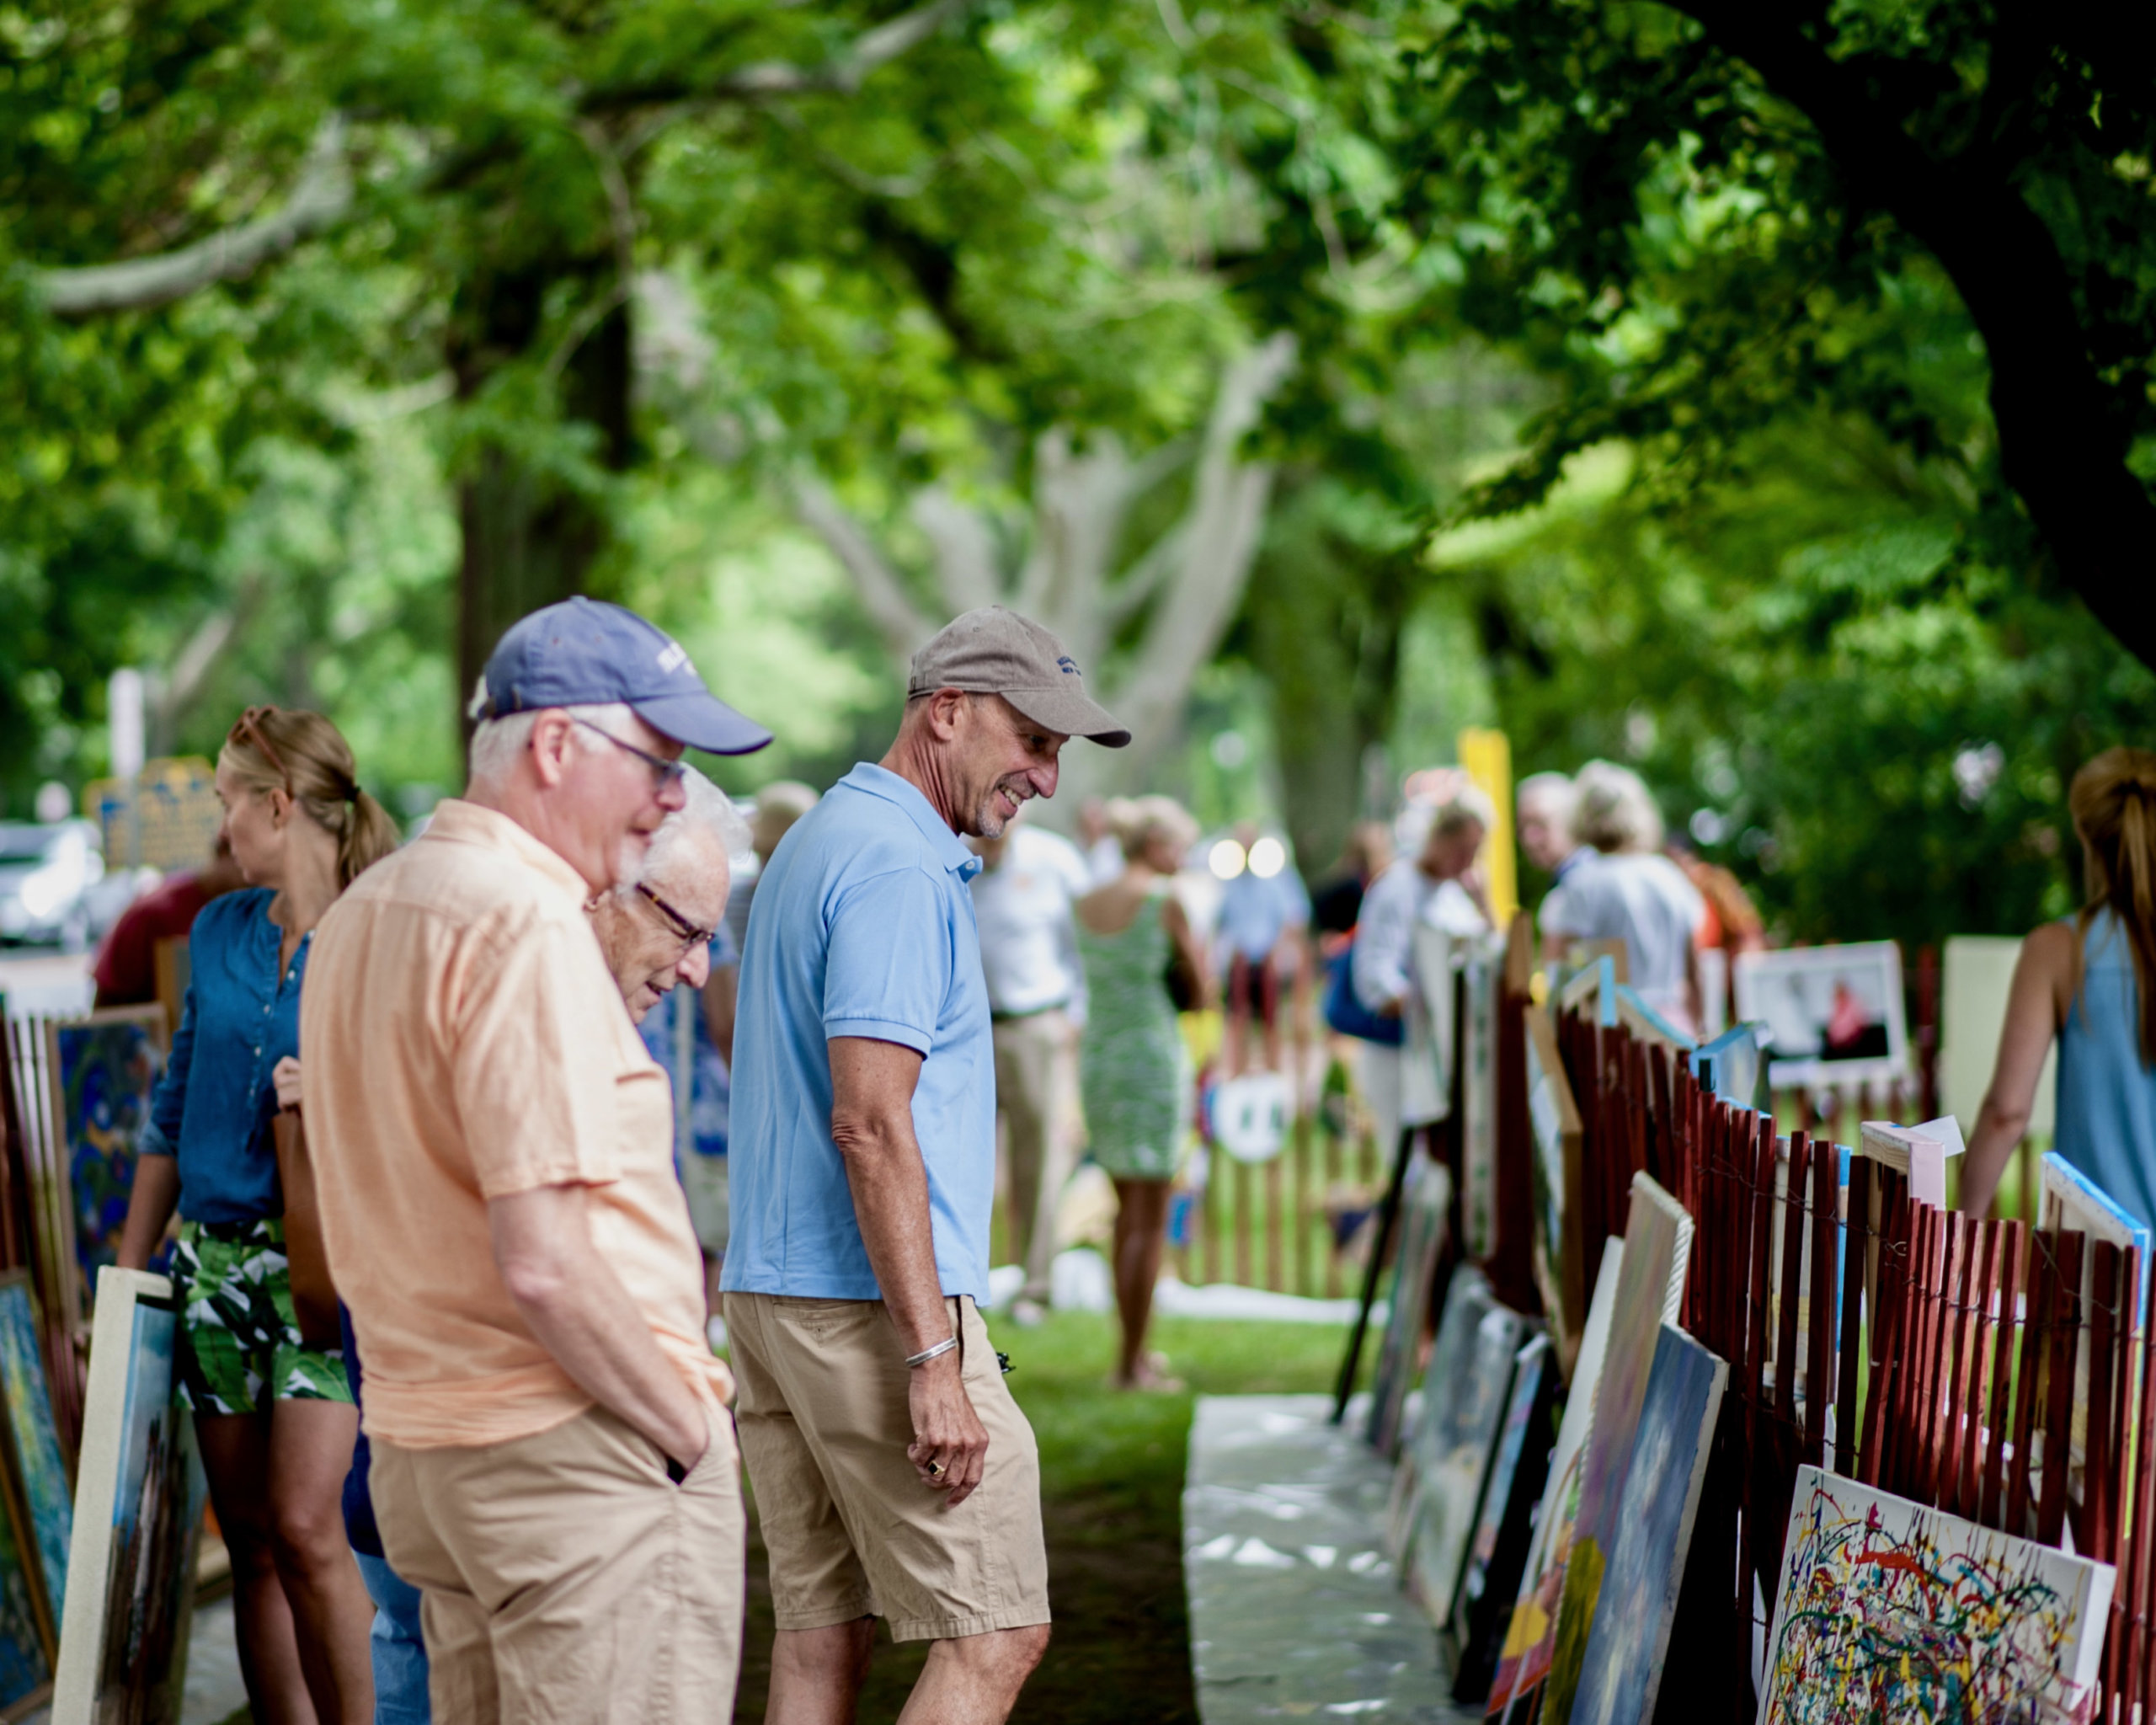 The Clothesline Art Sale is a big hit year after year